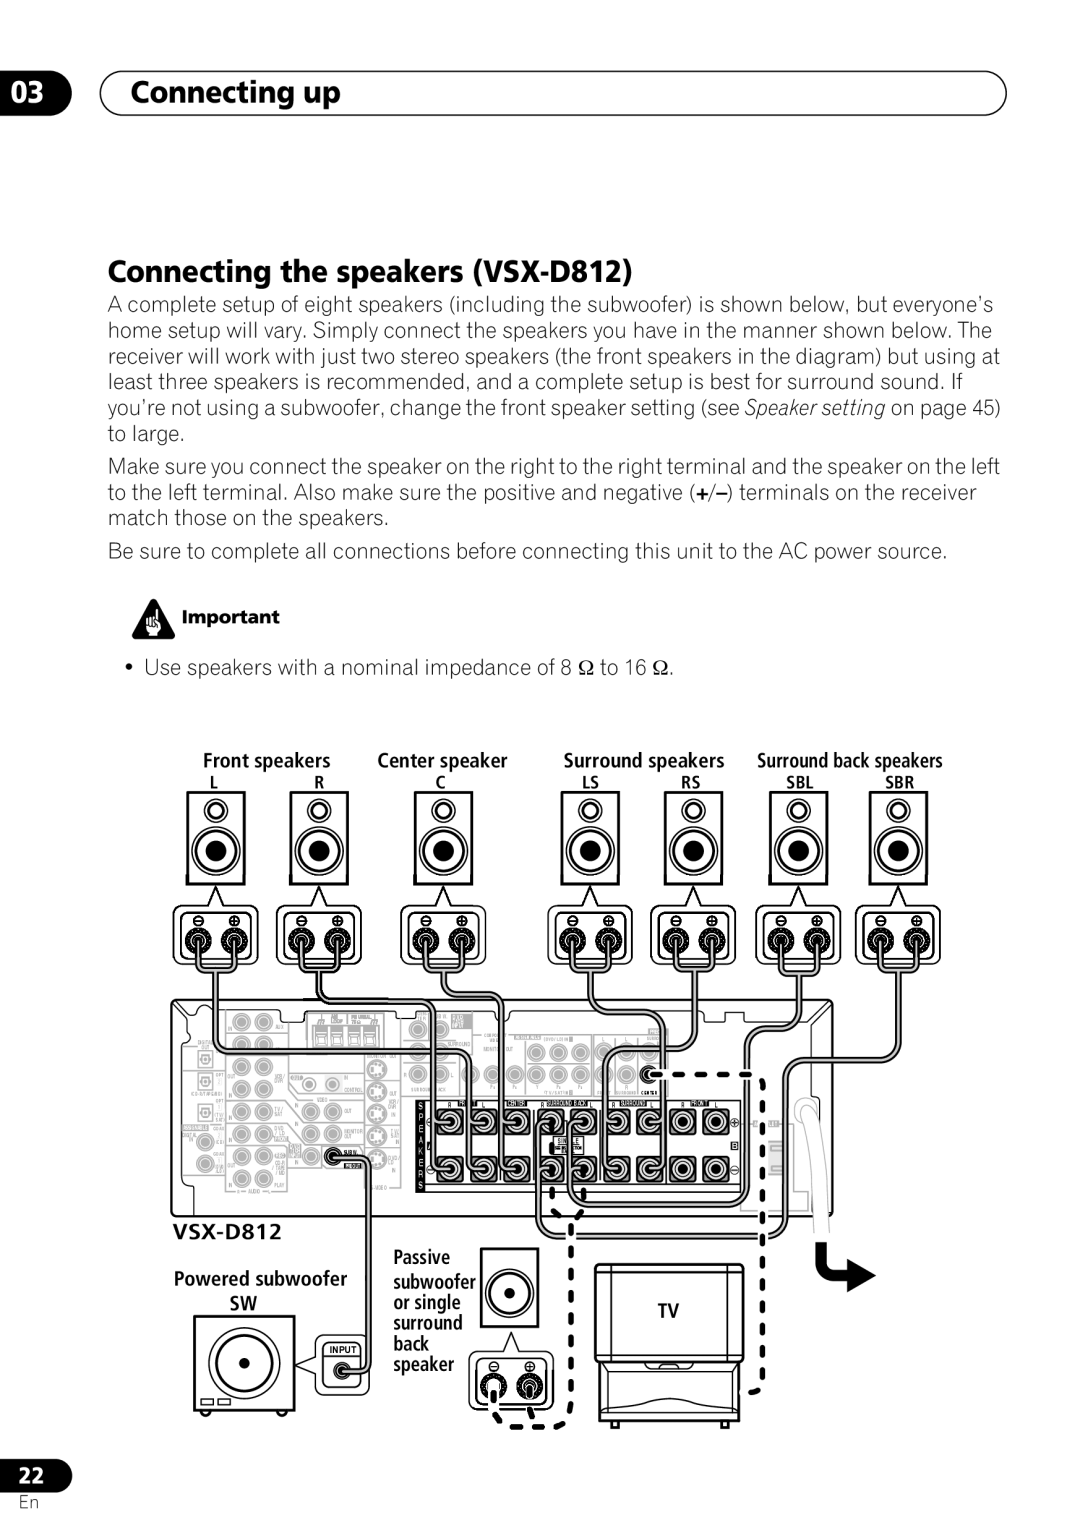 Pioneer VSX-D712 manual 03Connecting up Connecting the speakers VSX-D812, Surround speakers, Powered subwoofer 